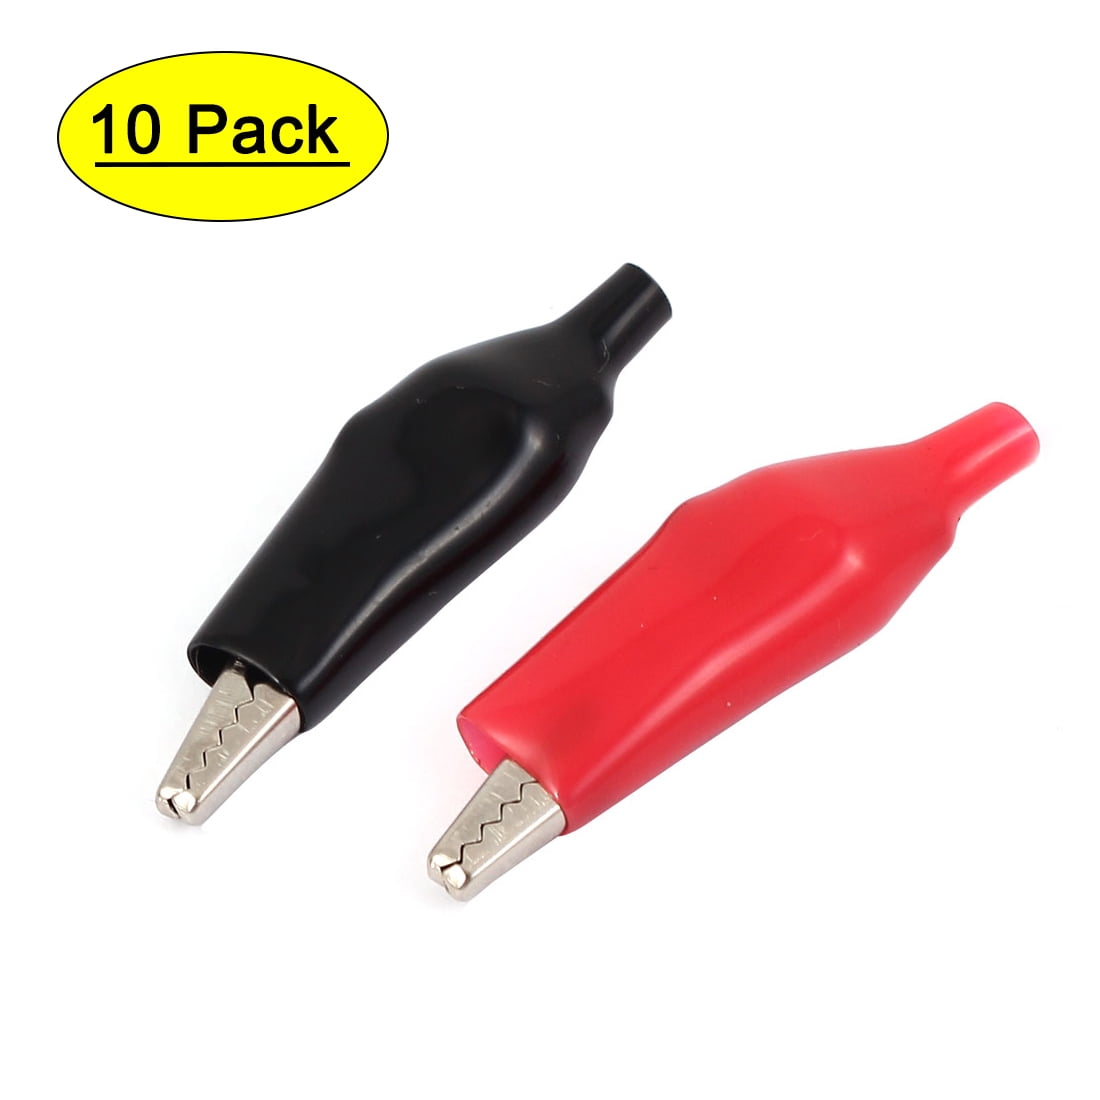 2 sets of 10 ea INSULATED ALLIGATOR CLIP SET electrical charging leads RED BLACK 